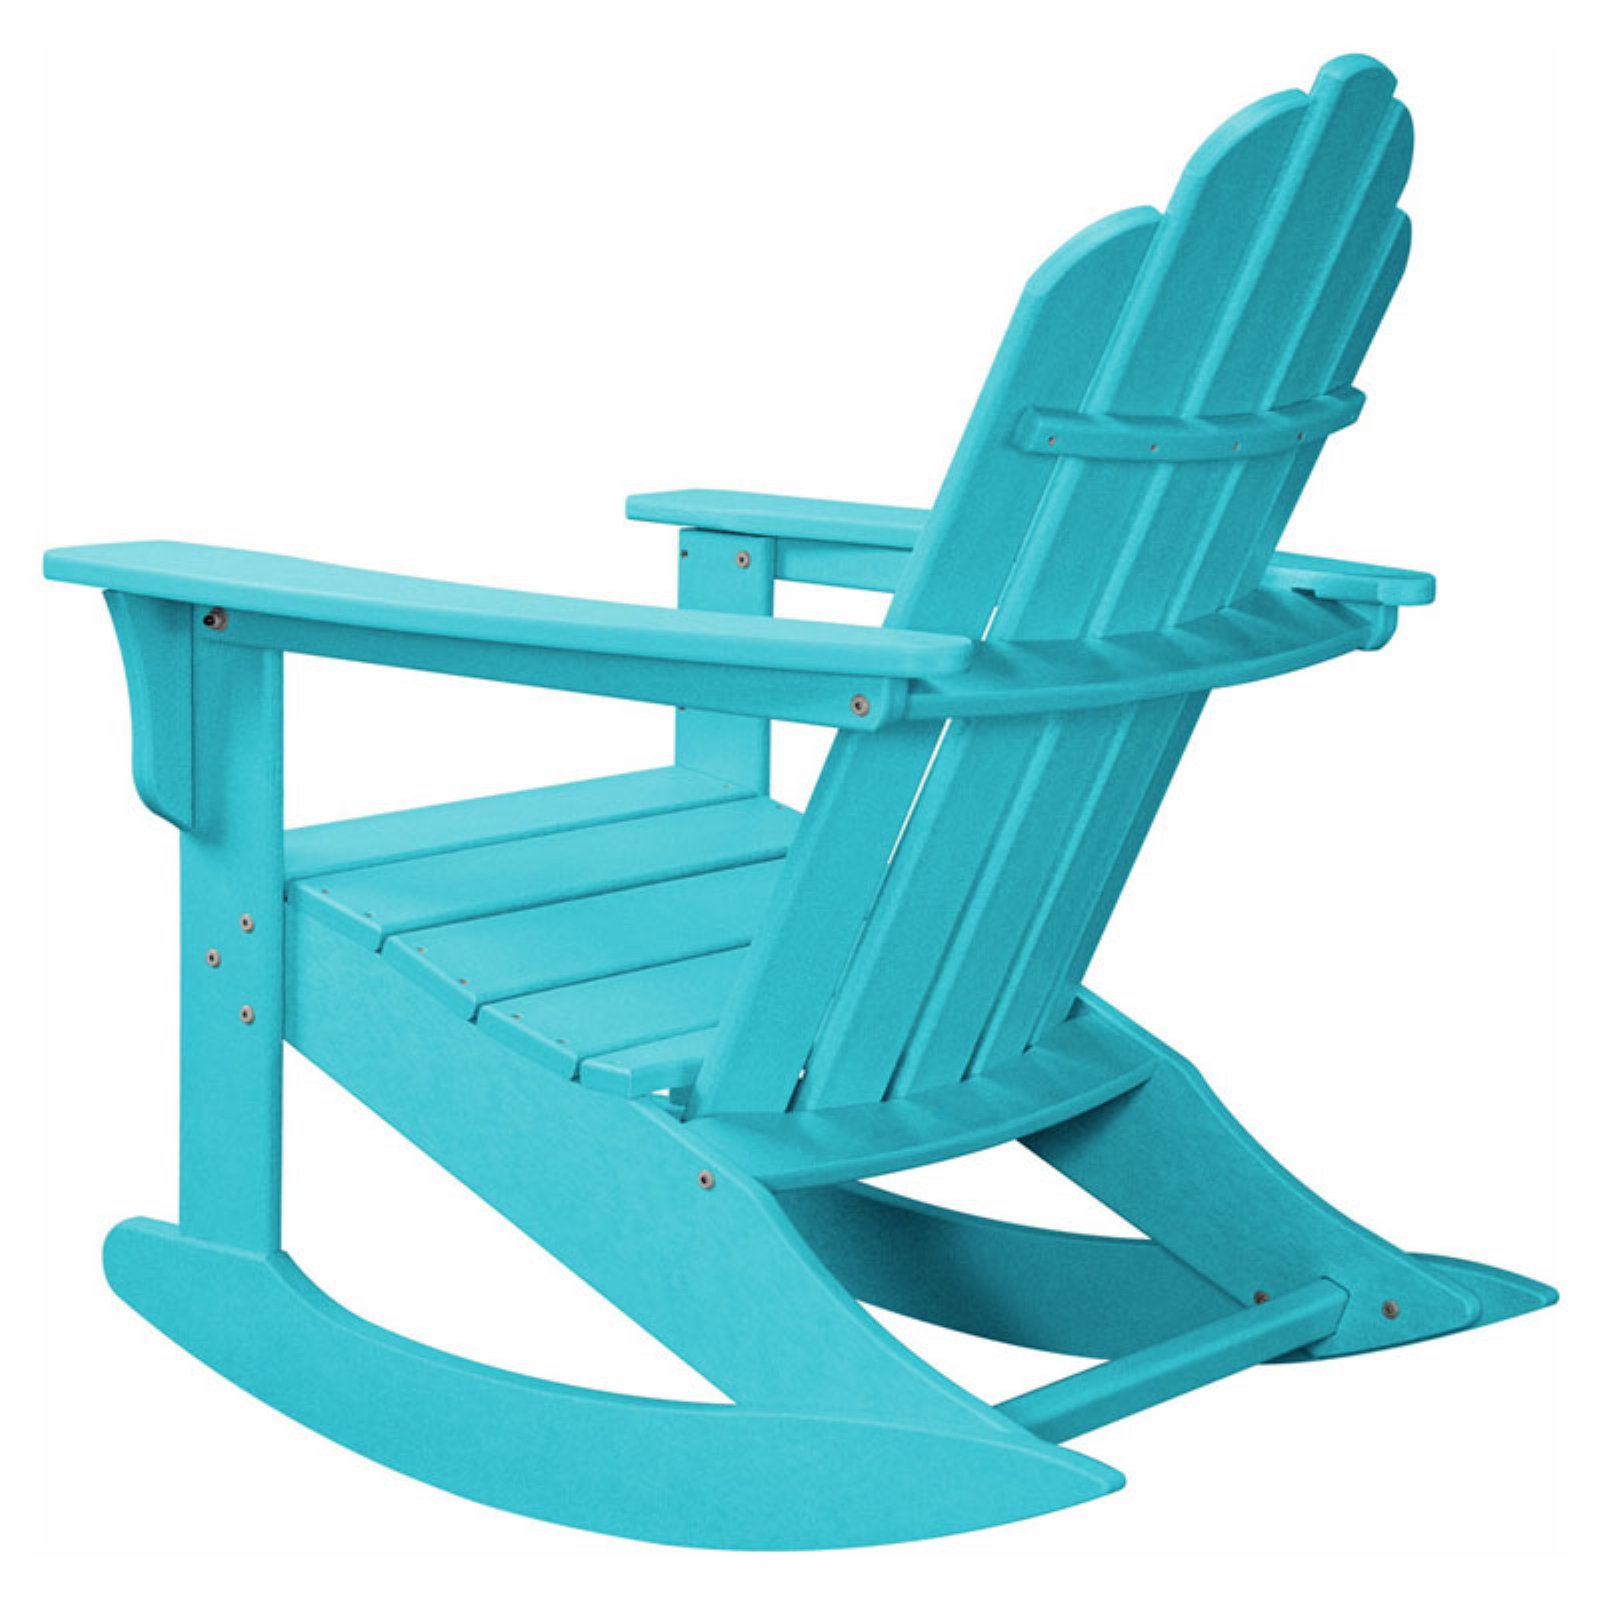 Hanover All-Weather Adirondack Rocking Chair in Aruba - image 3 of 4